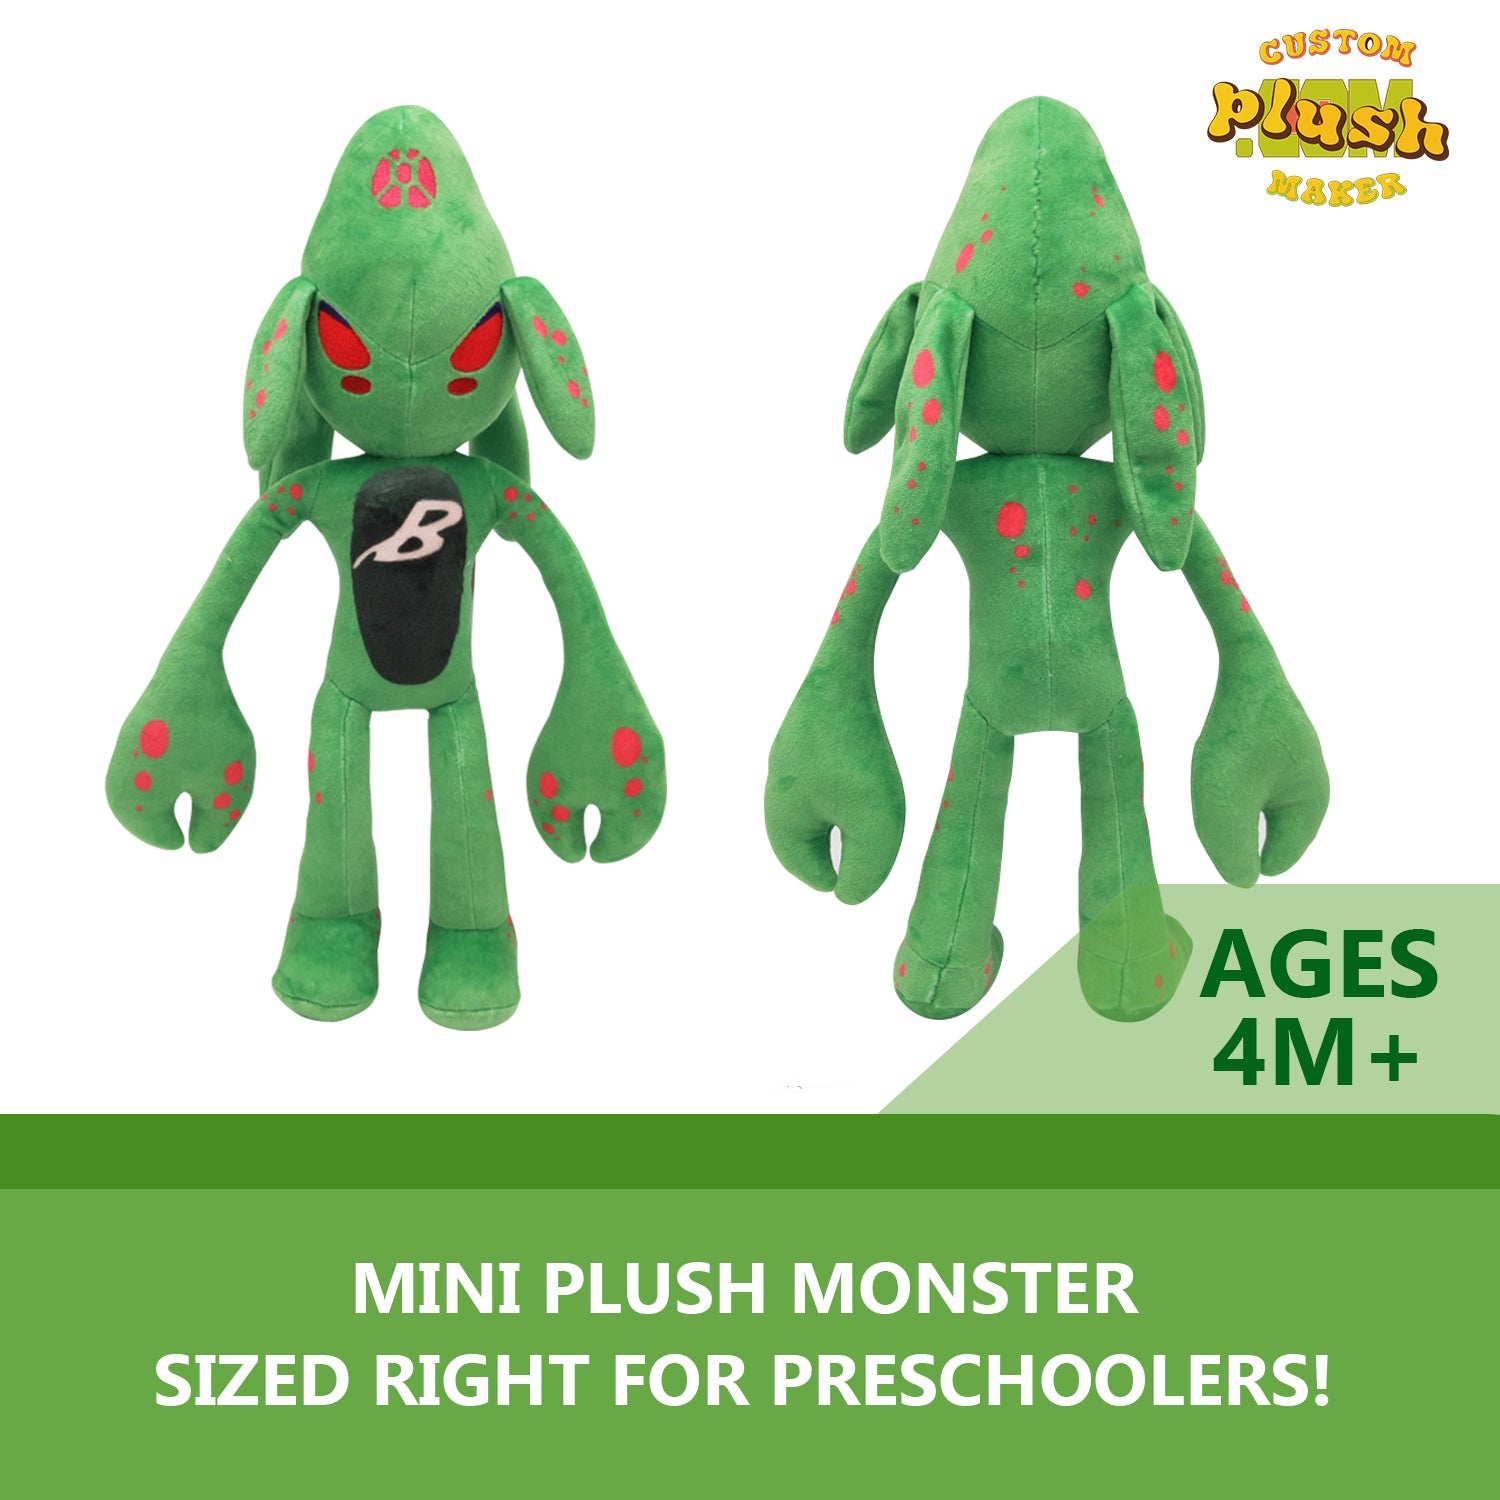 Alien Plush Toy – A whimsical stuffed toy featuring an adorable extraterrestrial design, perfect for adding a touch of intergalactic charm to your collection